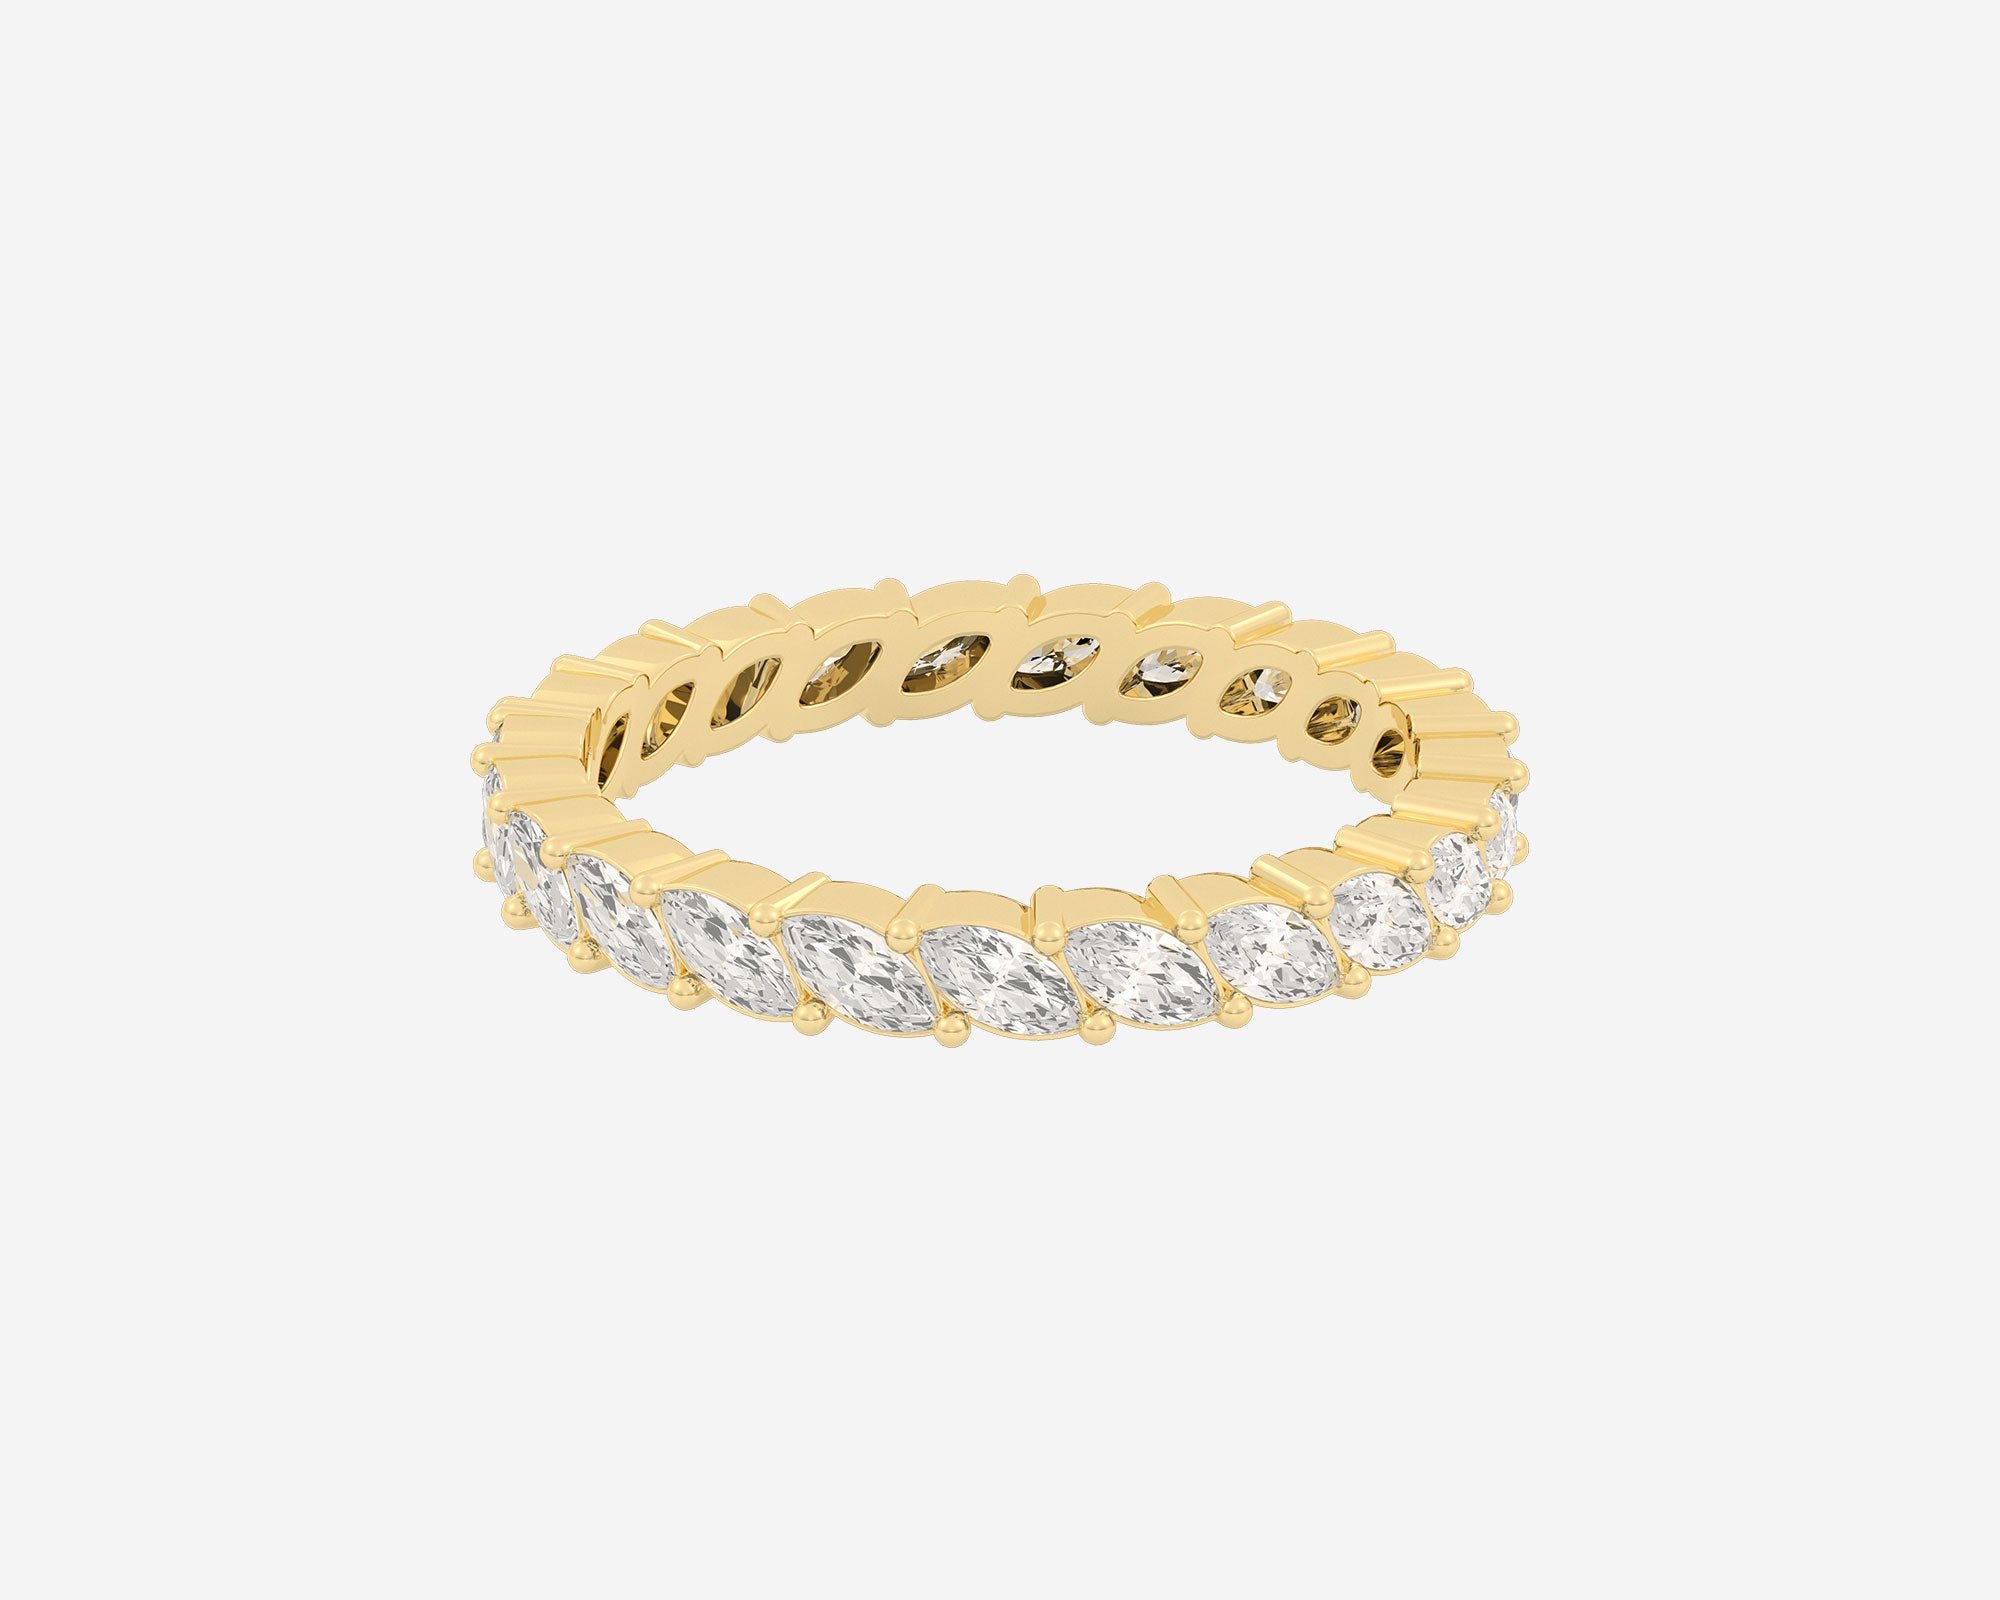 The Full Angled Marquise ring by Holden in yellow gold